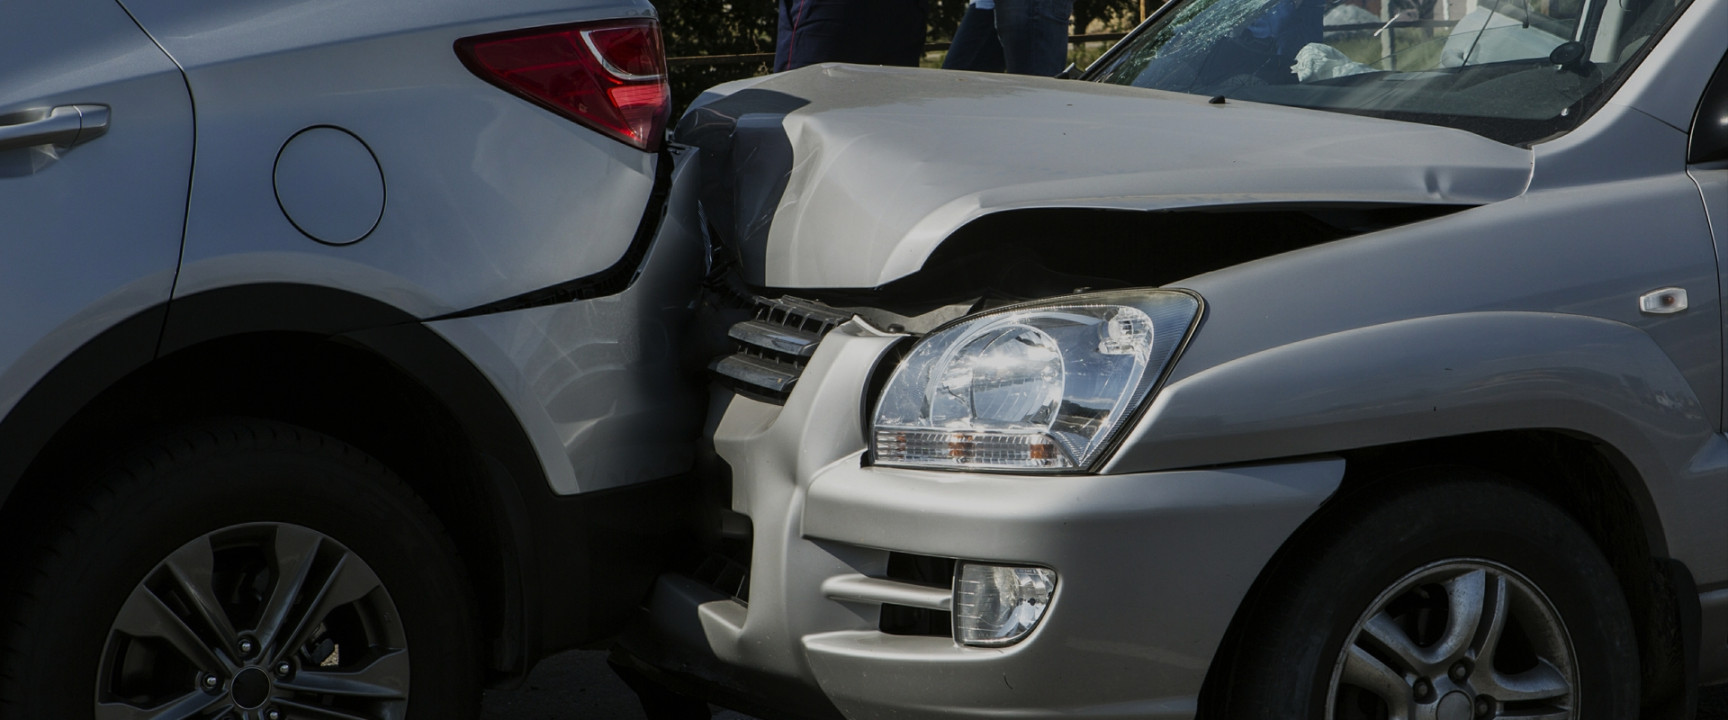 Toronto Car Accident Lawyers  Millions Recovered  Free Consultations